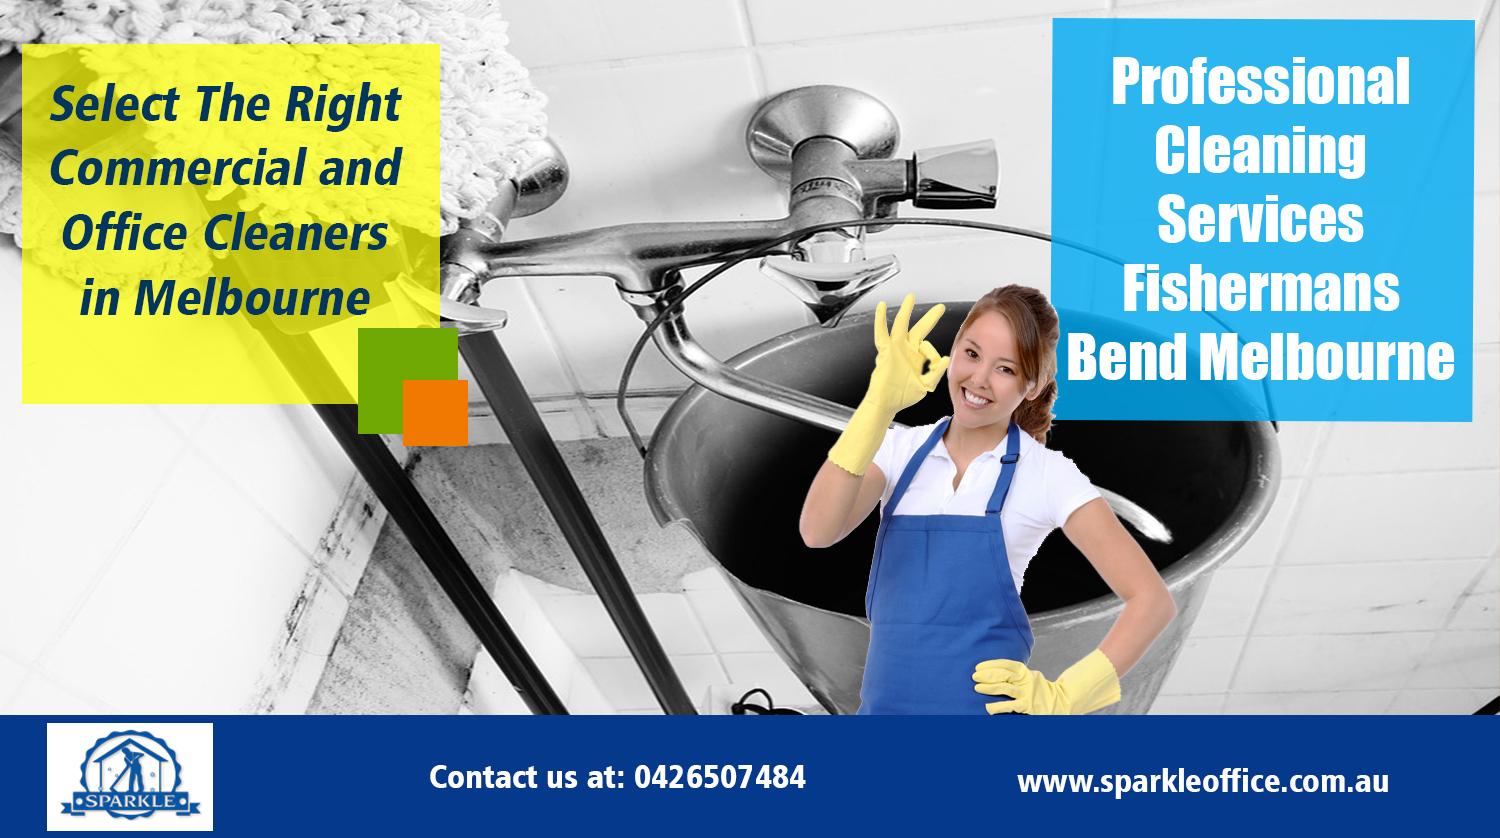 Professional Cleaning Services Fishermans Bend Melbourne